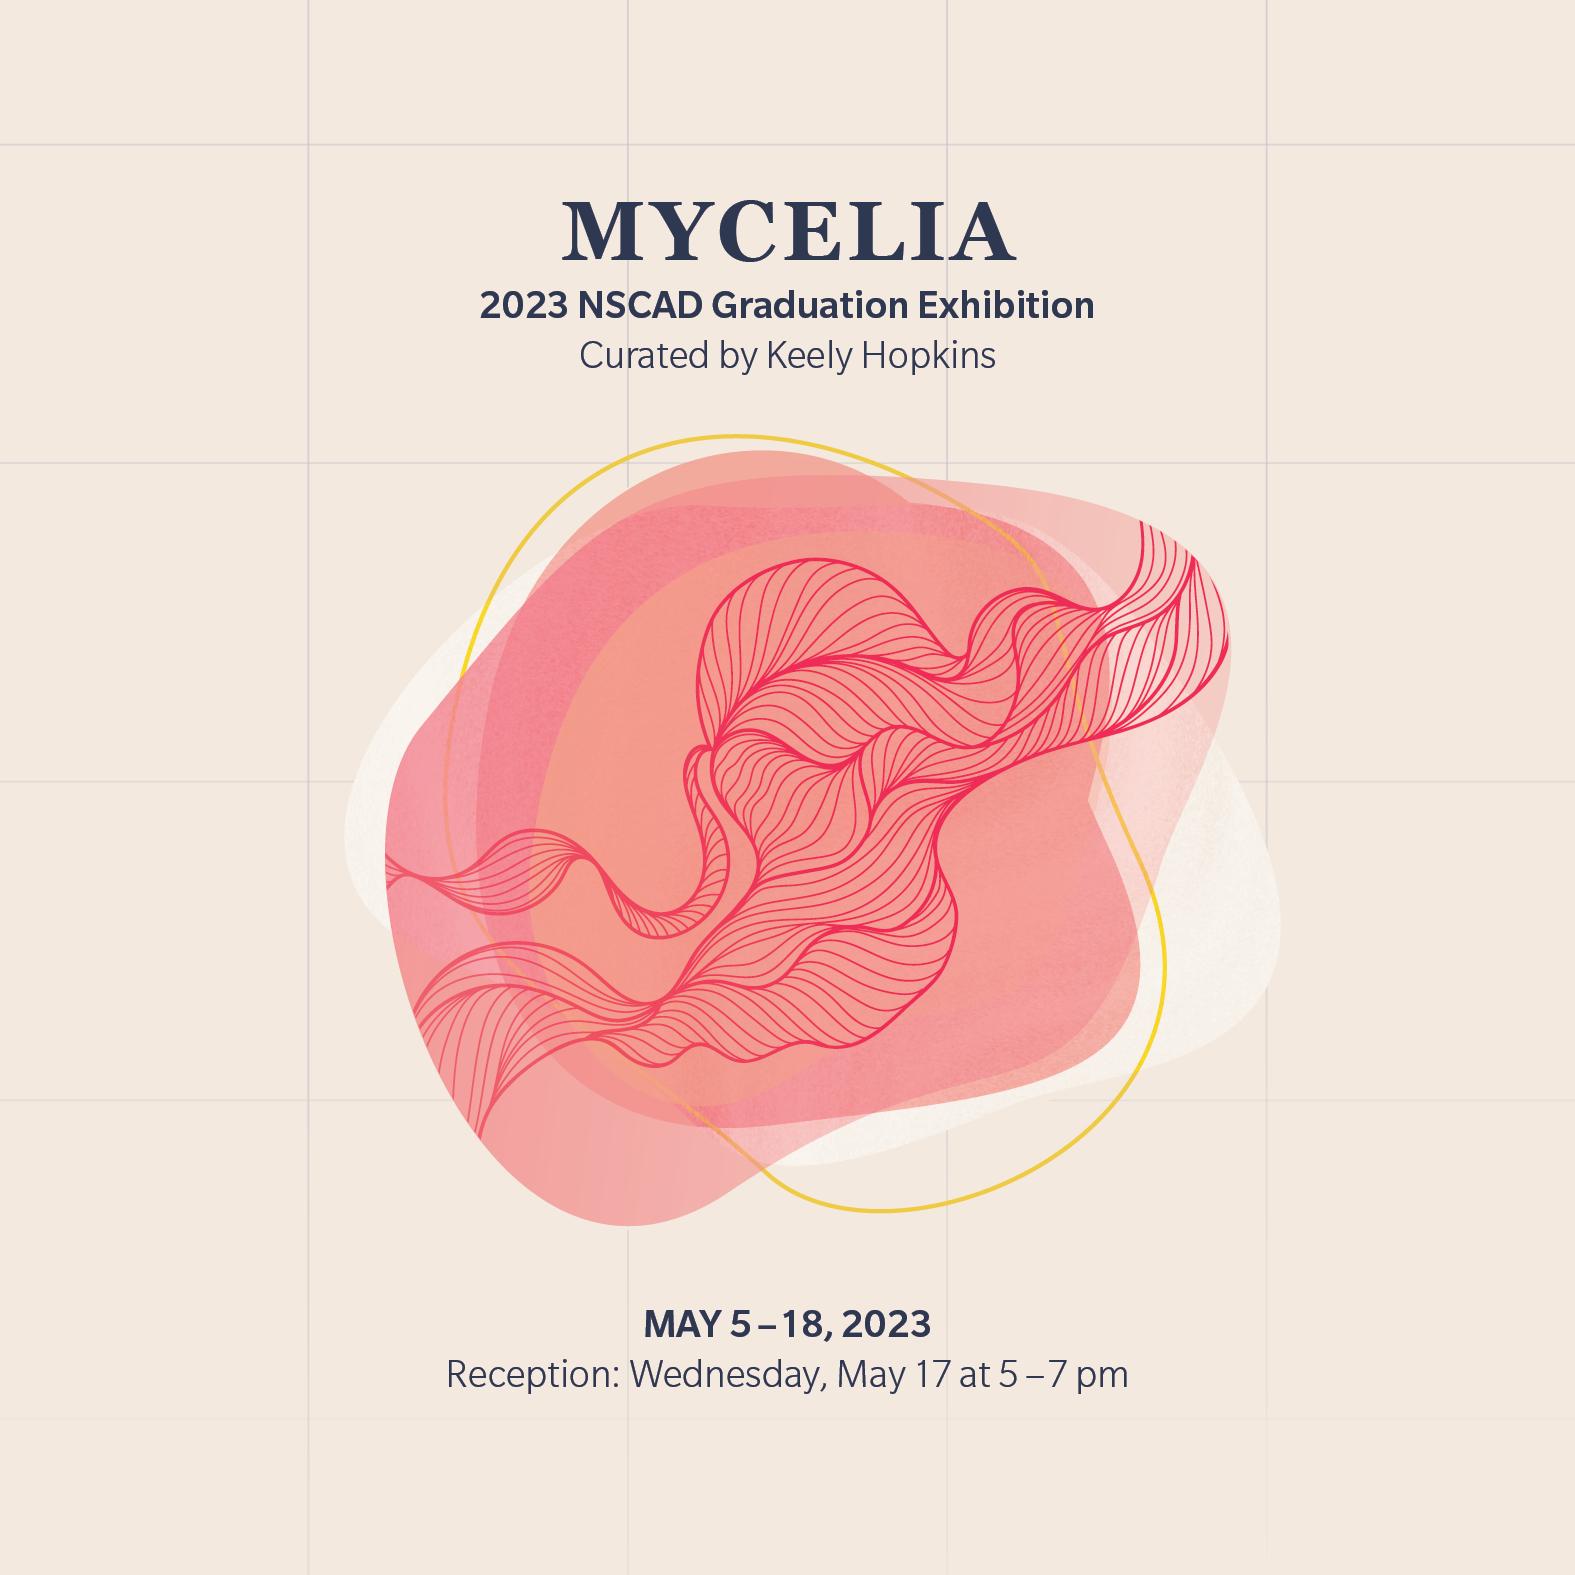 Beige background with grey grid. A coral pink organic shape in the middle with dark pink fine lines in wave shapes. : MYCELIA 2023 NSCAD SHOWCASE Graduation Exhibition Curated by Keely Hopkins MAY 5-18, 2023 Reception Wednesday May 17 at 5-7pm